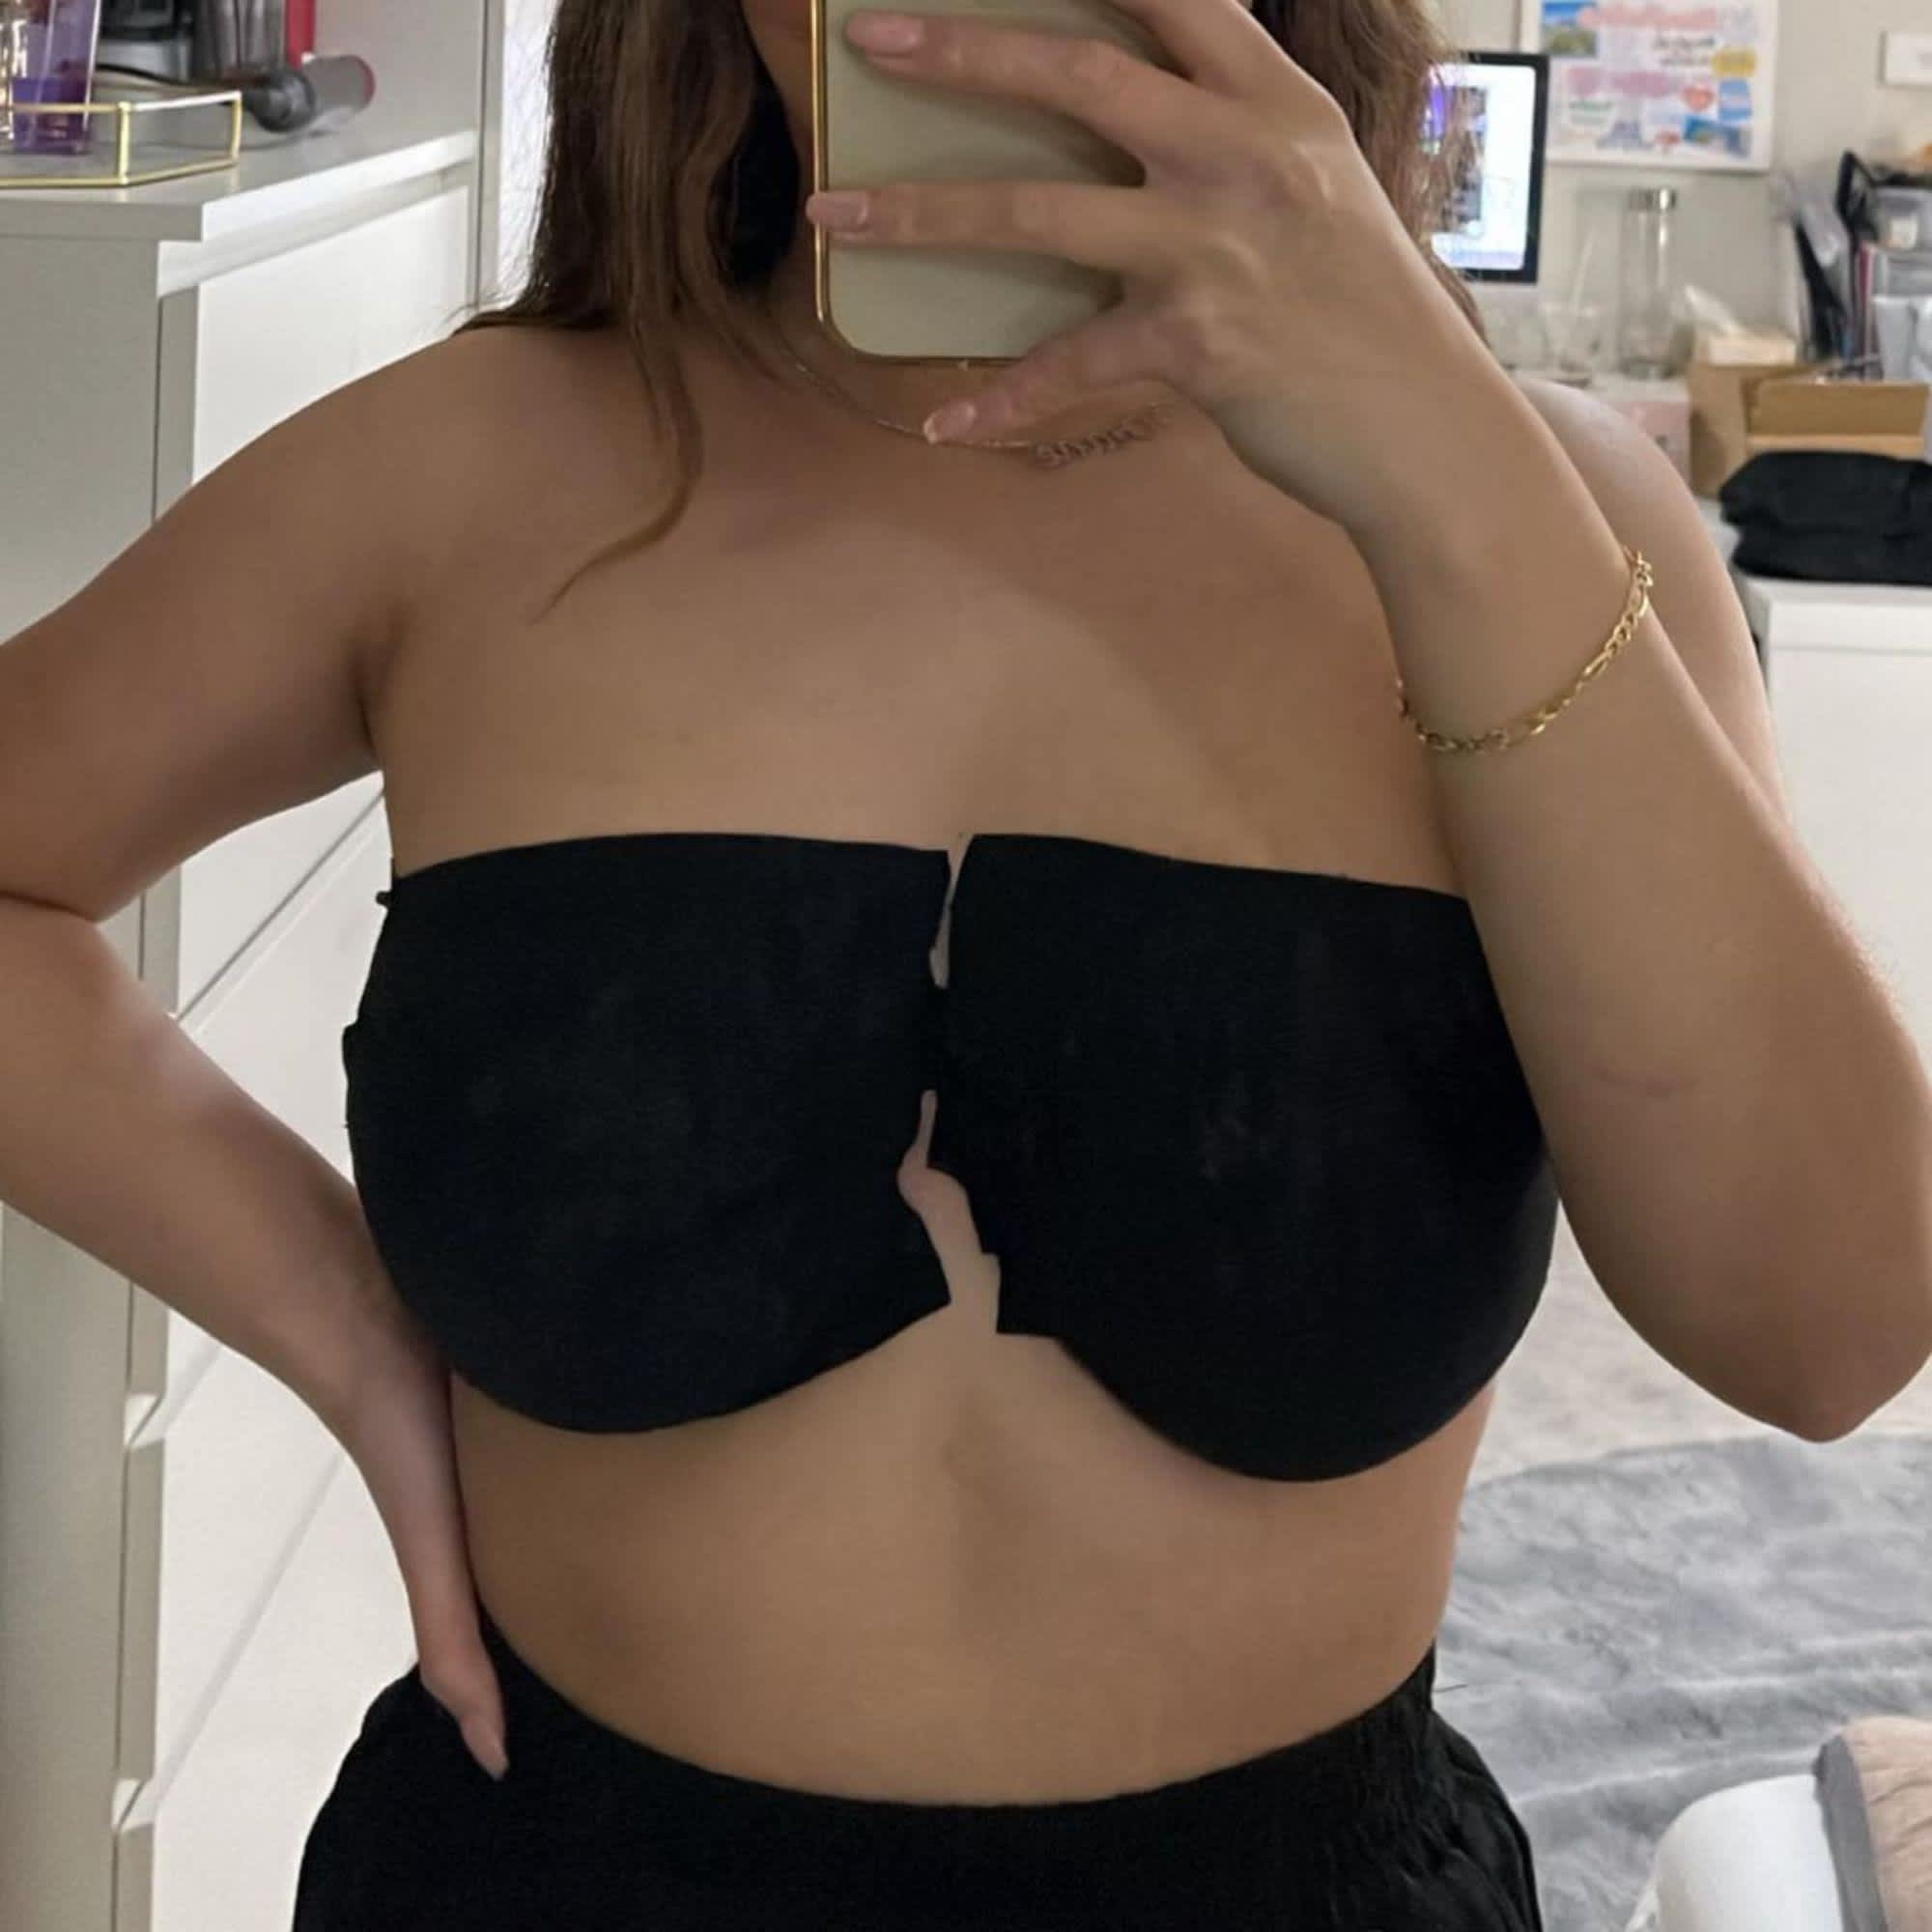 This Boob Tape Going Viral on TikTok Holds Every Boob Size to Perk